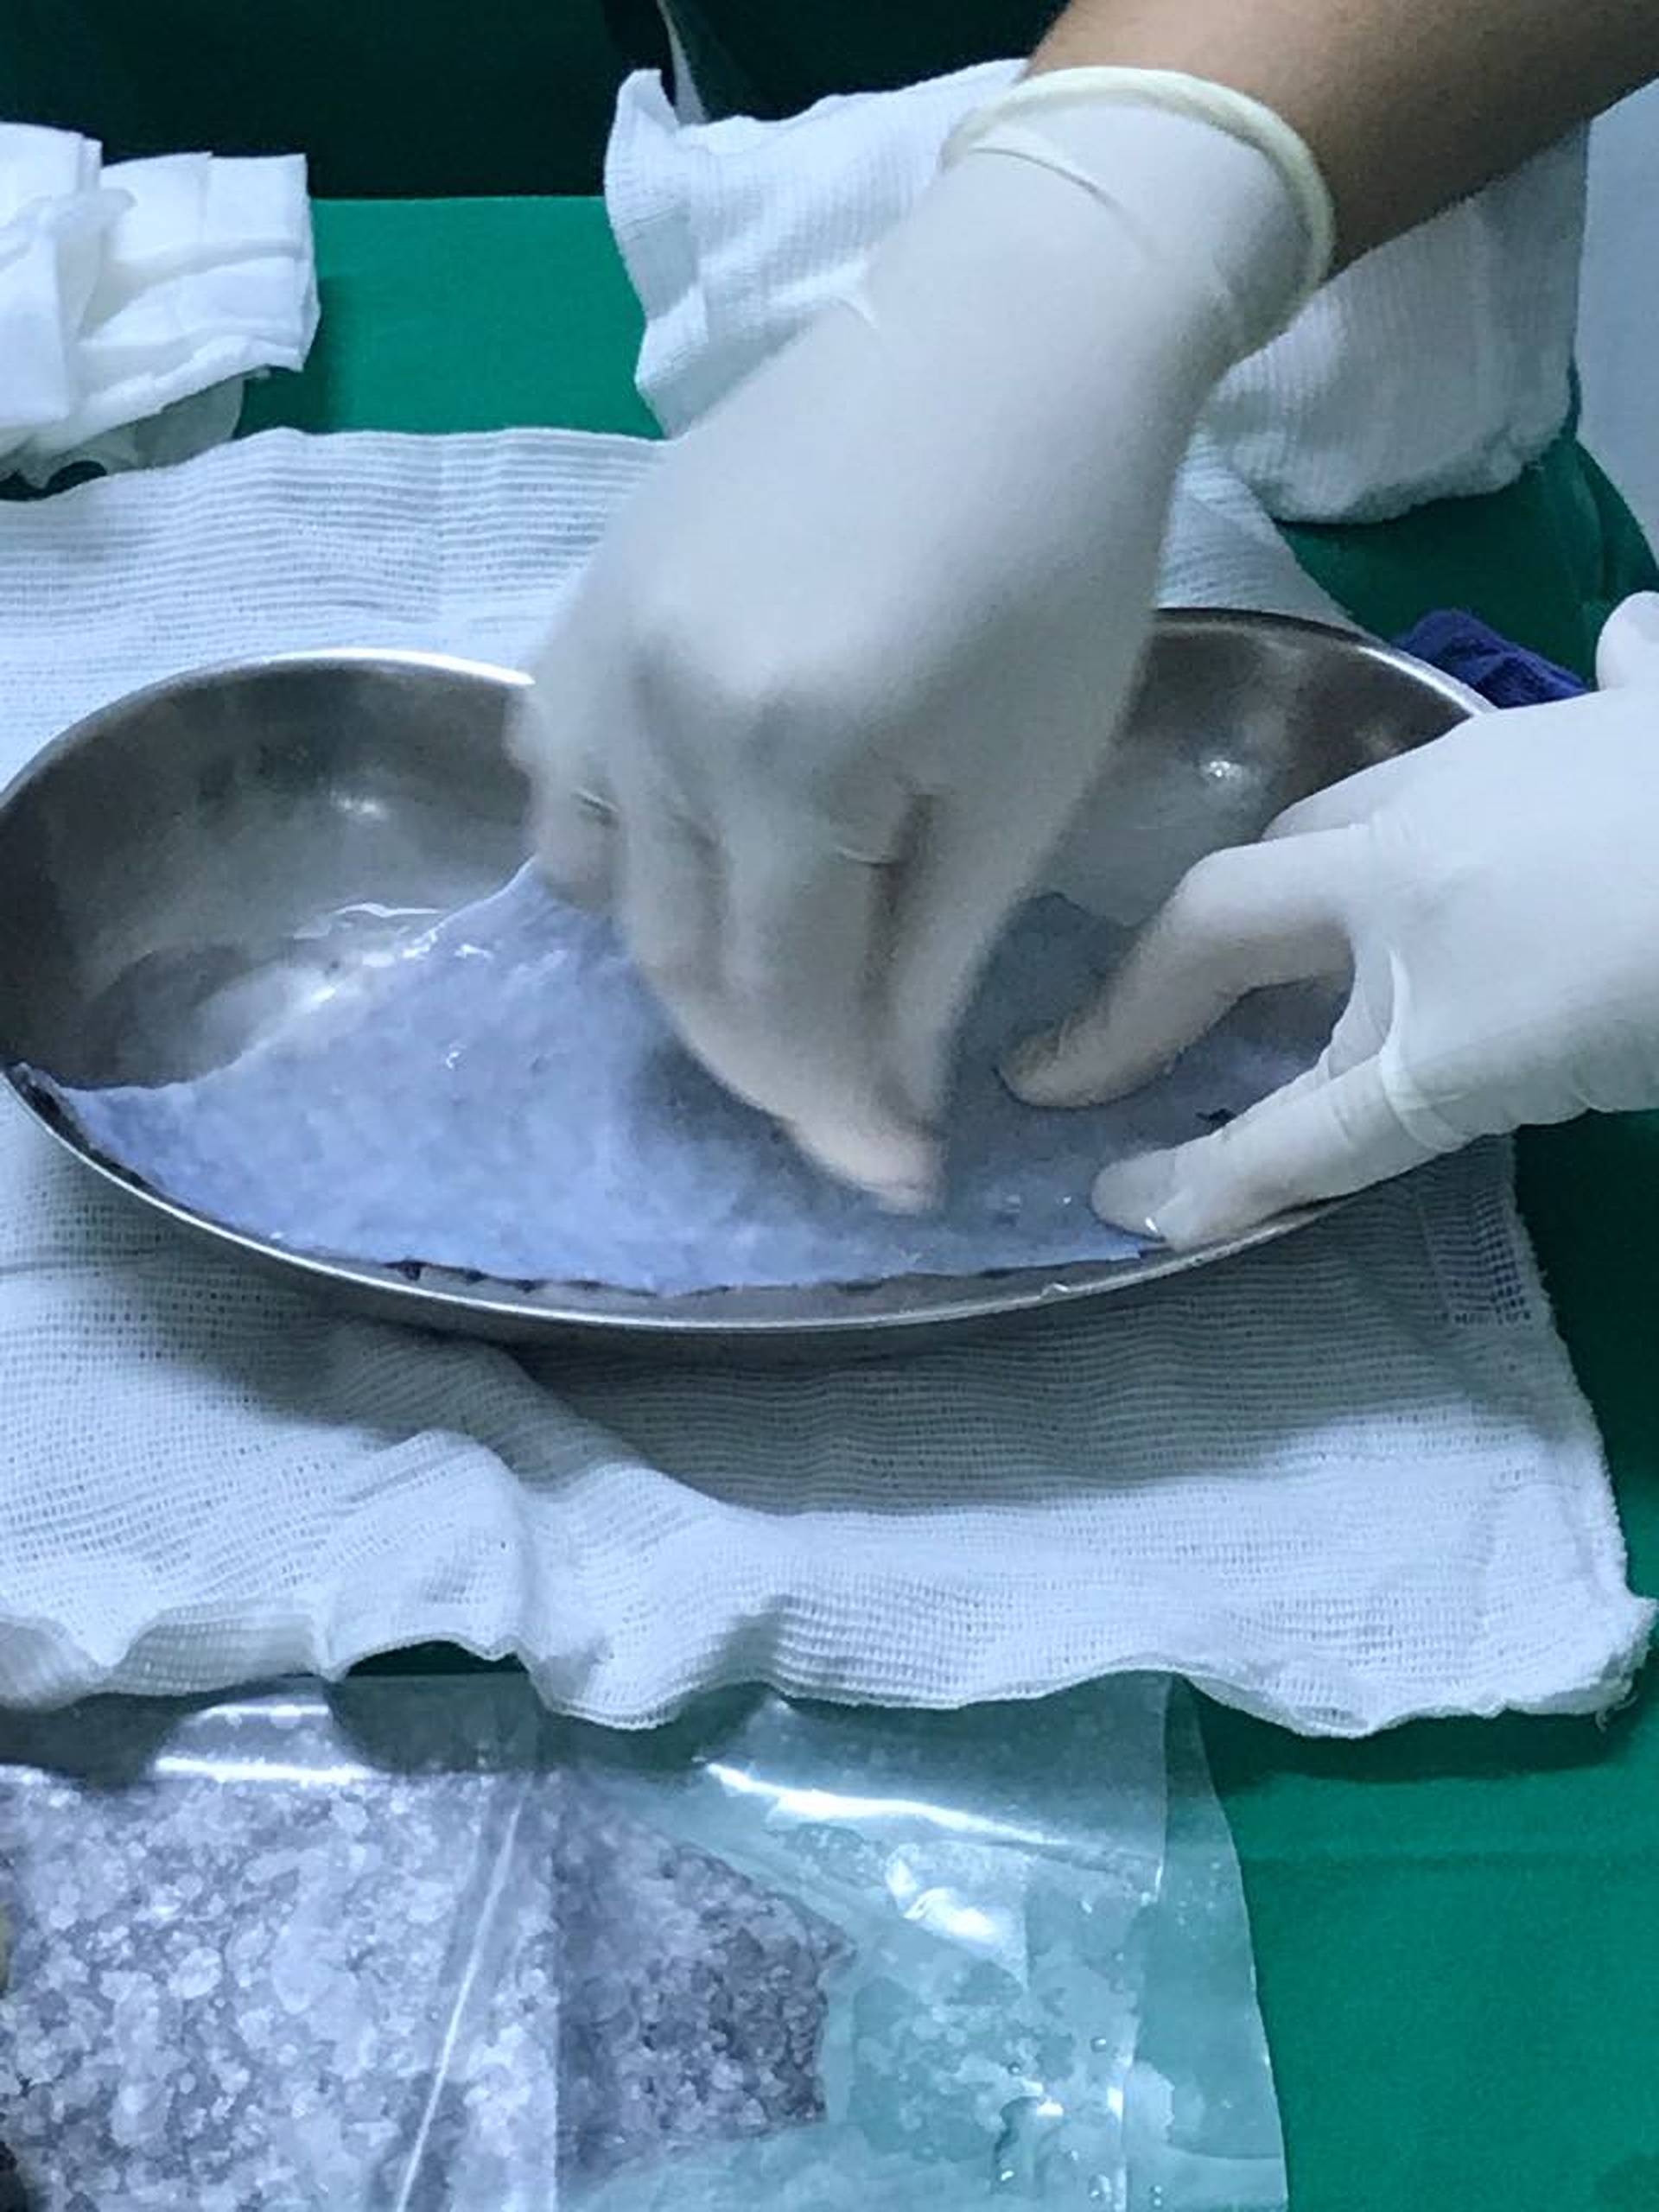 Woman Born Without A Vagina Has Been Given One Using Tilapia Fish Skin ( Neovaginoplasty)